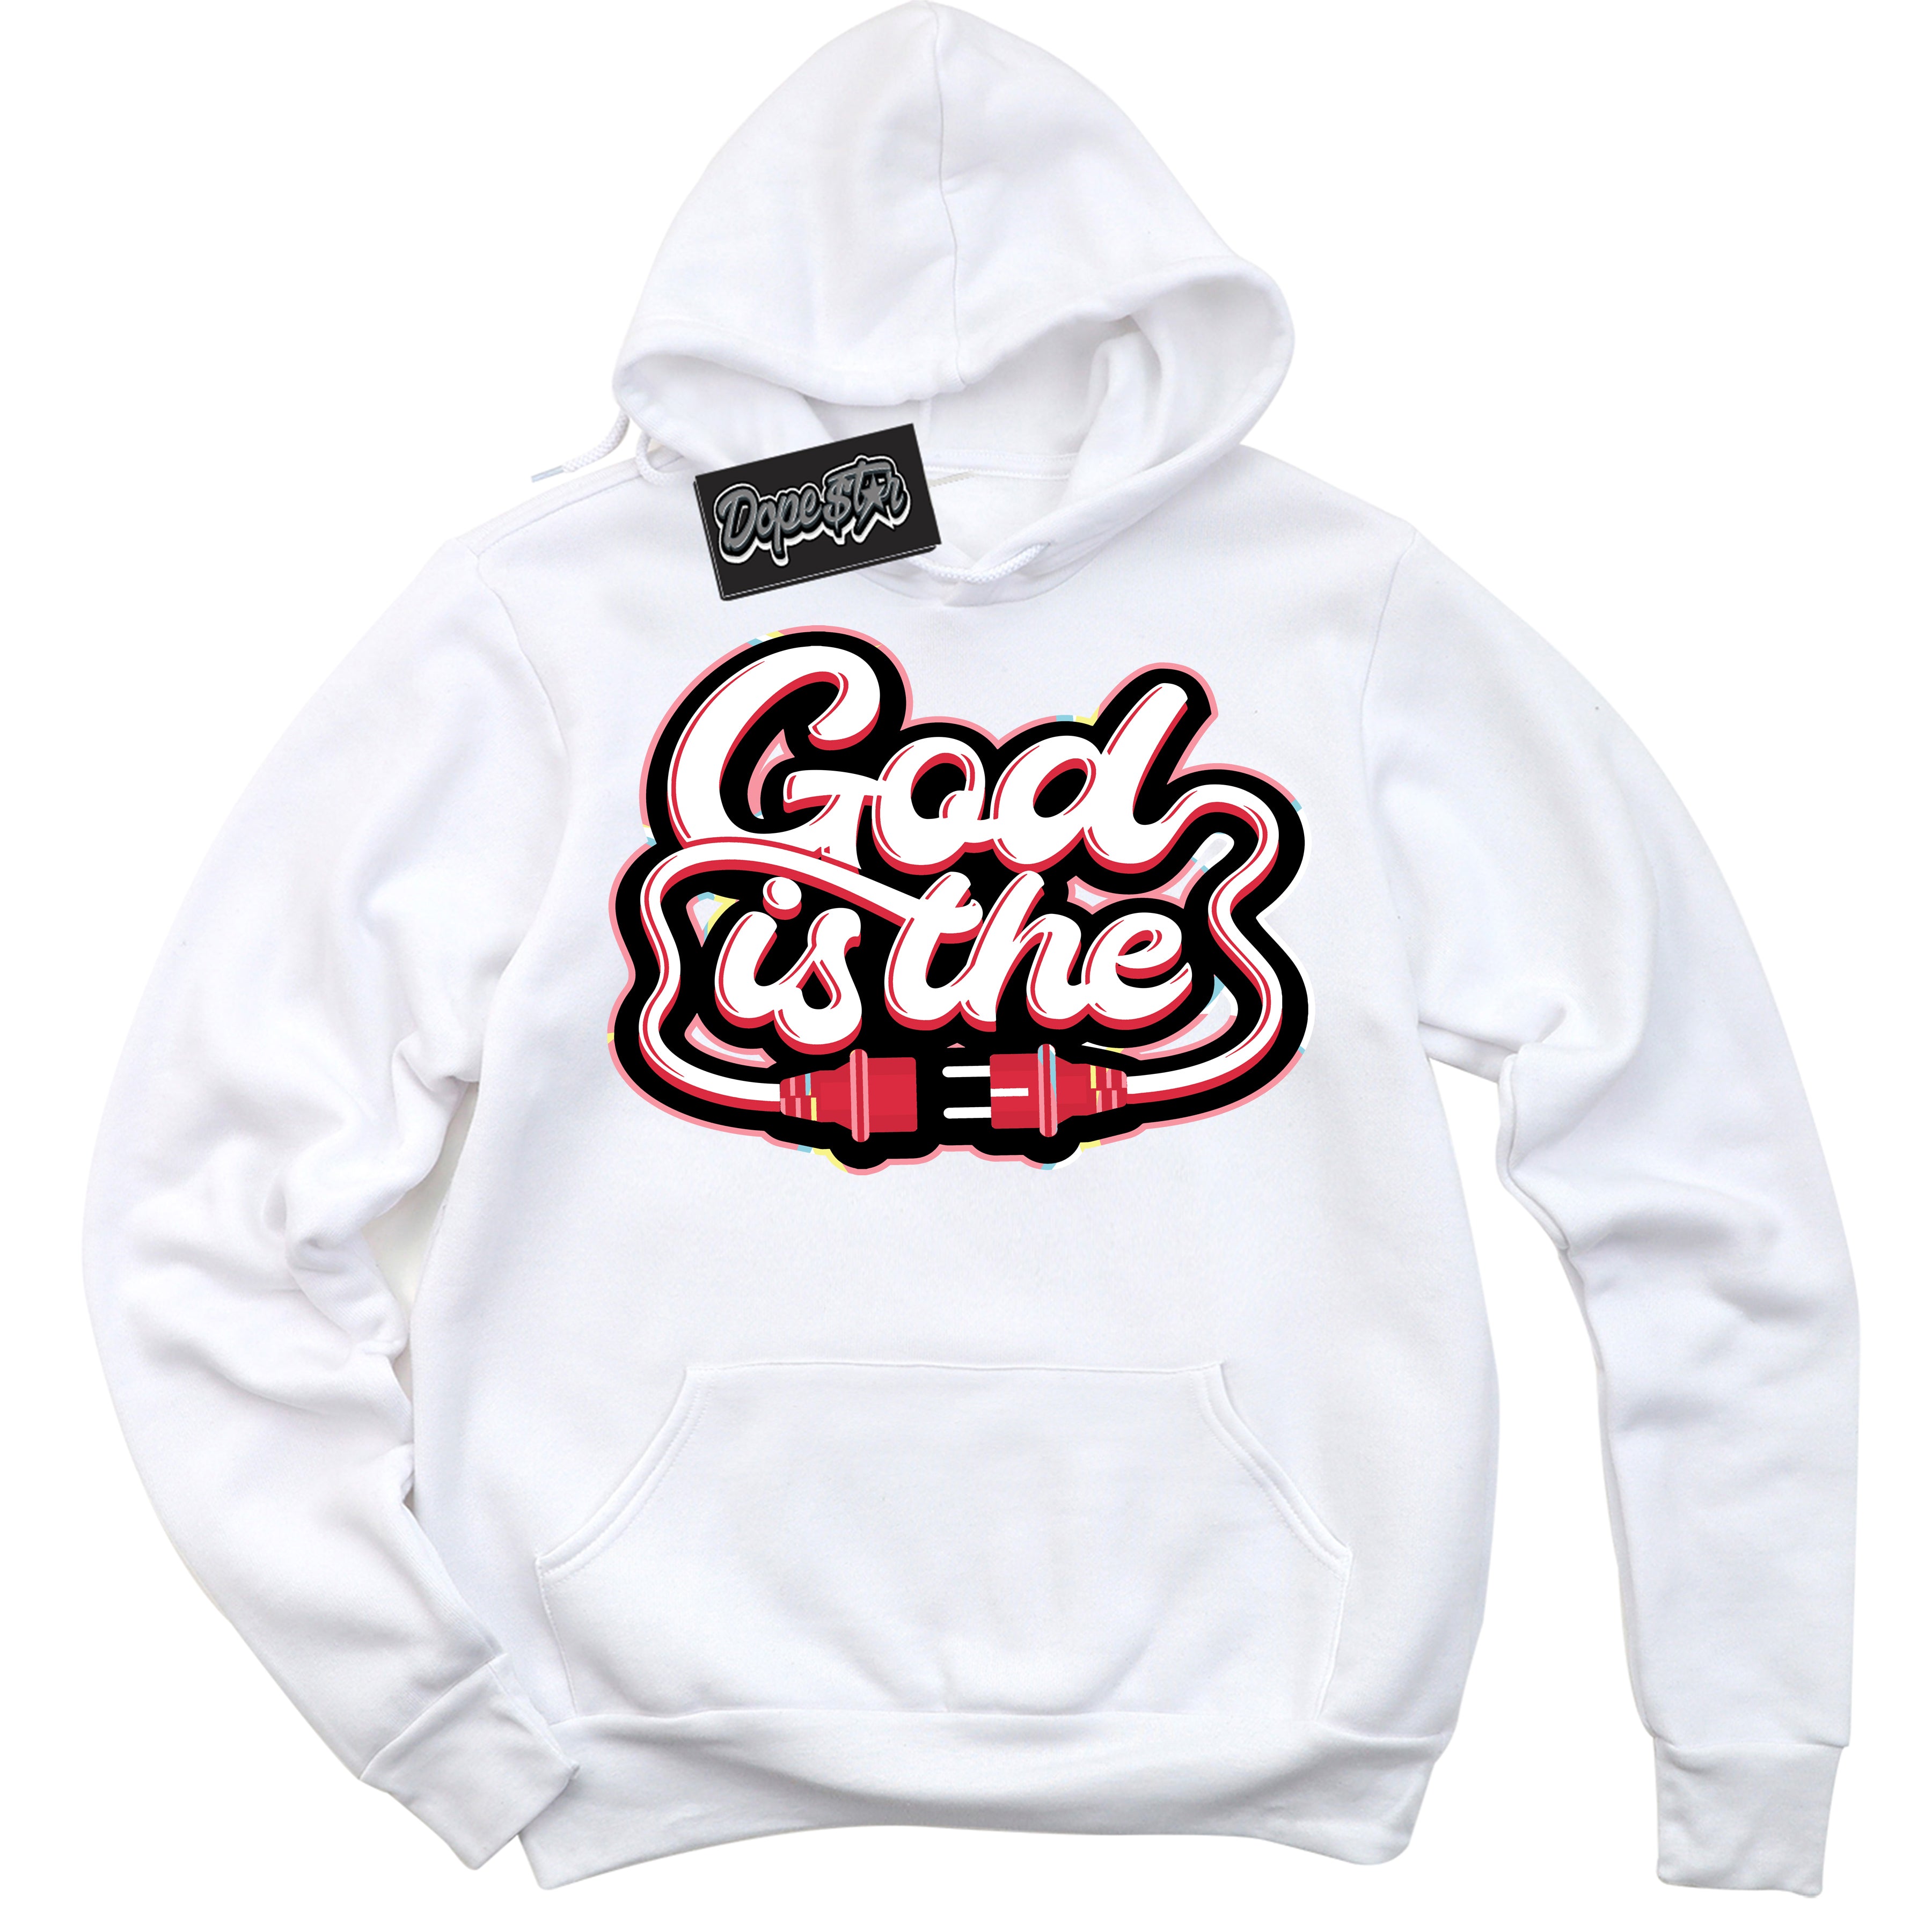 Cool White Graphic DopeStar Hoodie with “ God Is The “ print, that perfectly matches Spider-Verse 1s sneakers